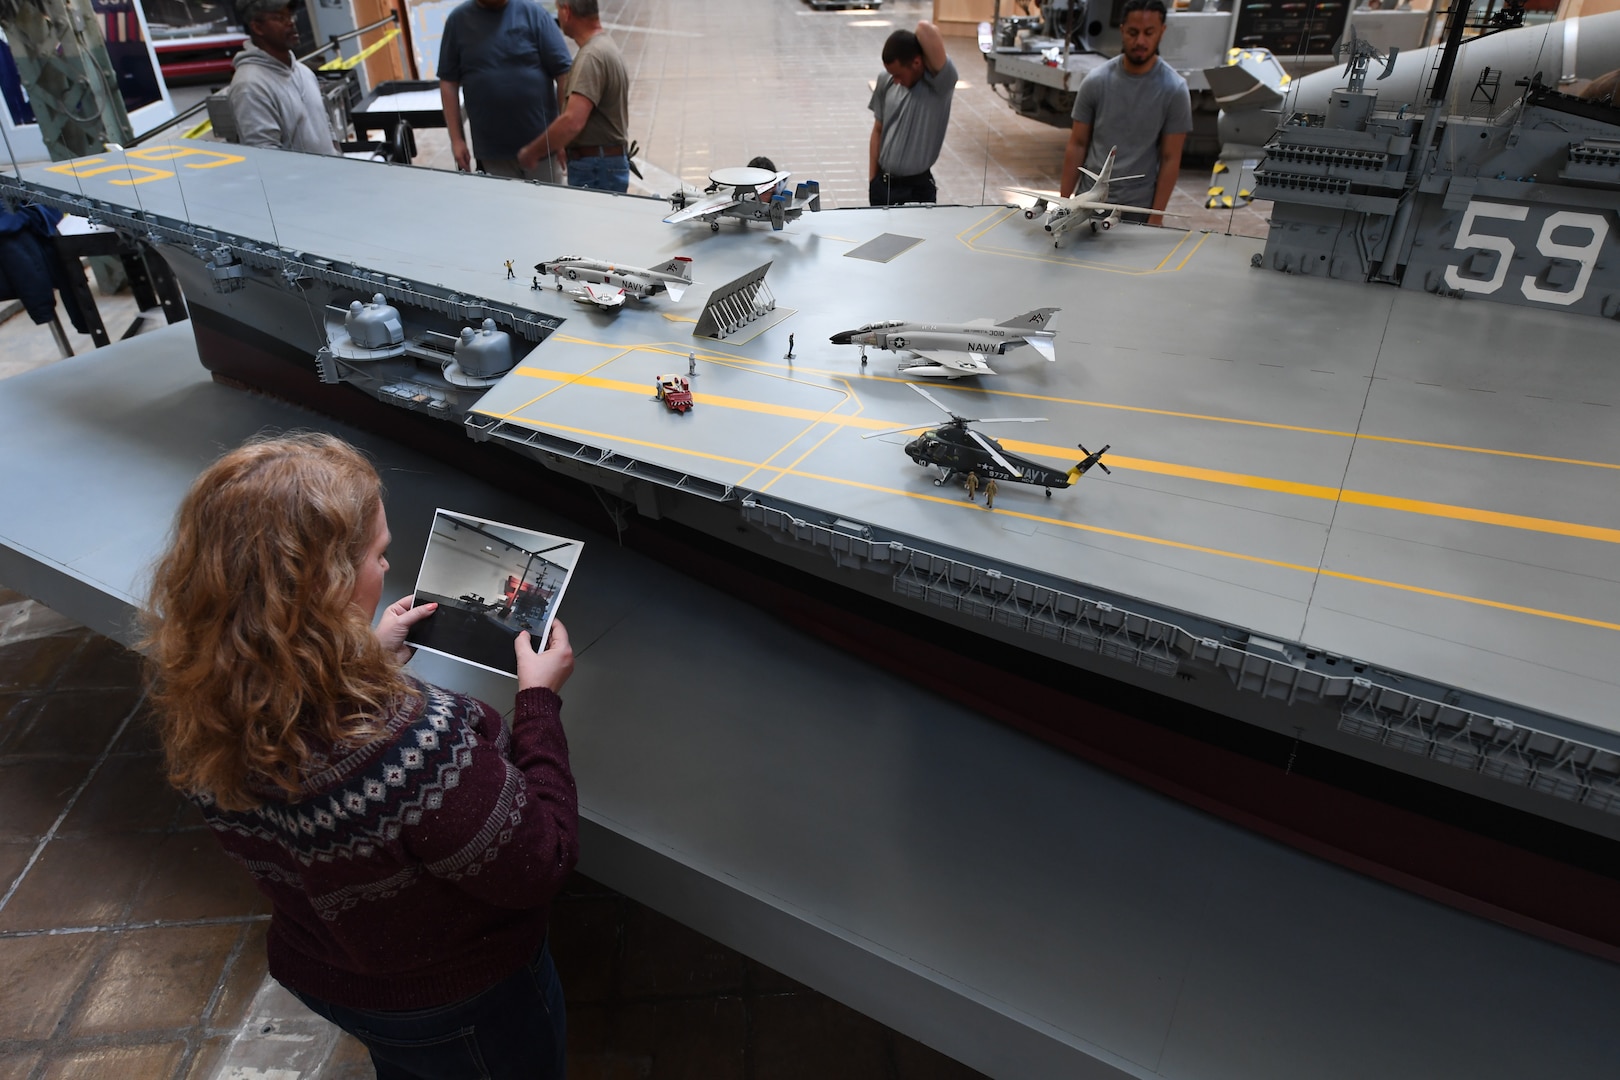 Naval Surface Warfare Center, Carderock Division’s Jennifer Marland, the Assistant Curator with the Office of the Curator, carefully examines a photograph to ensure all parts and pieces of the USS Forrestal model are put back correctly after the move to its new home in the National Museum of the U.S. Navy at the Washington Navy Yard in Washington, D.C., on April 10. (U.S. Navy photo by Neubar Kamalian)